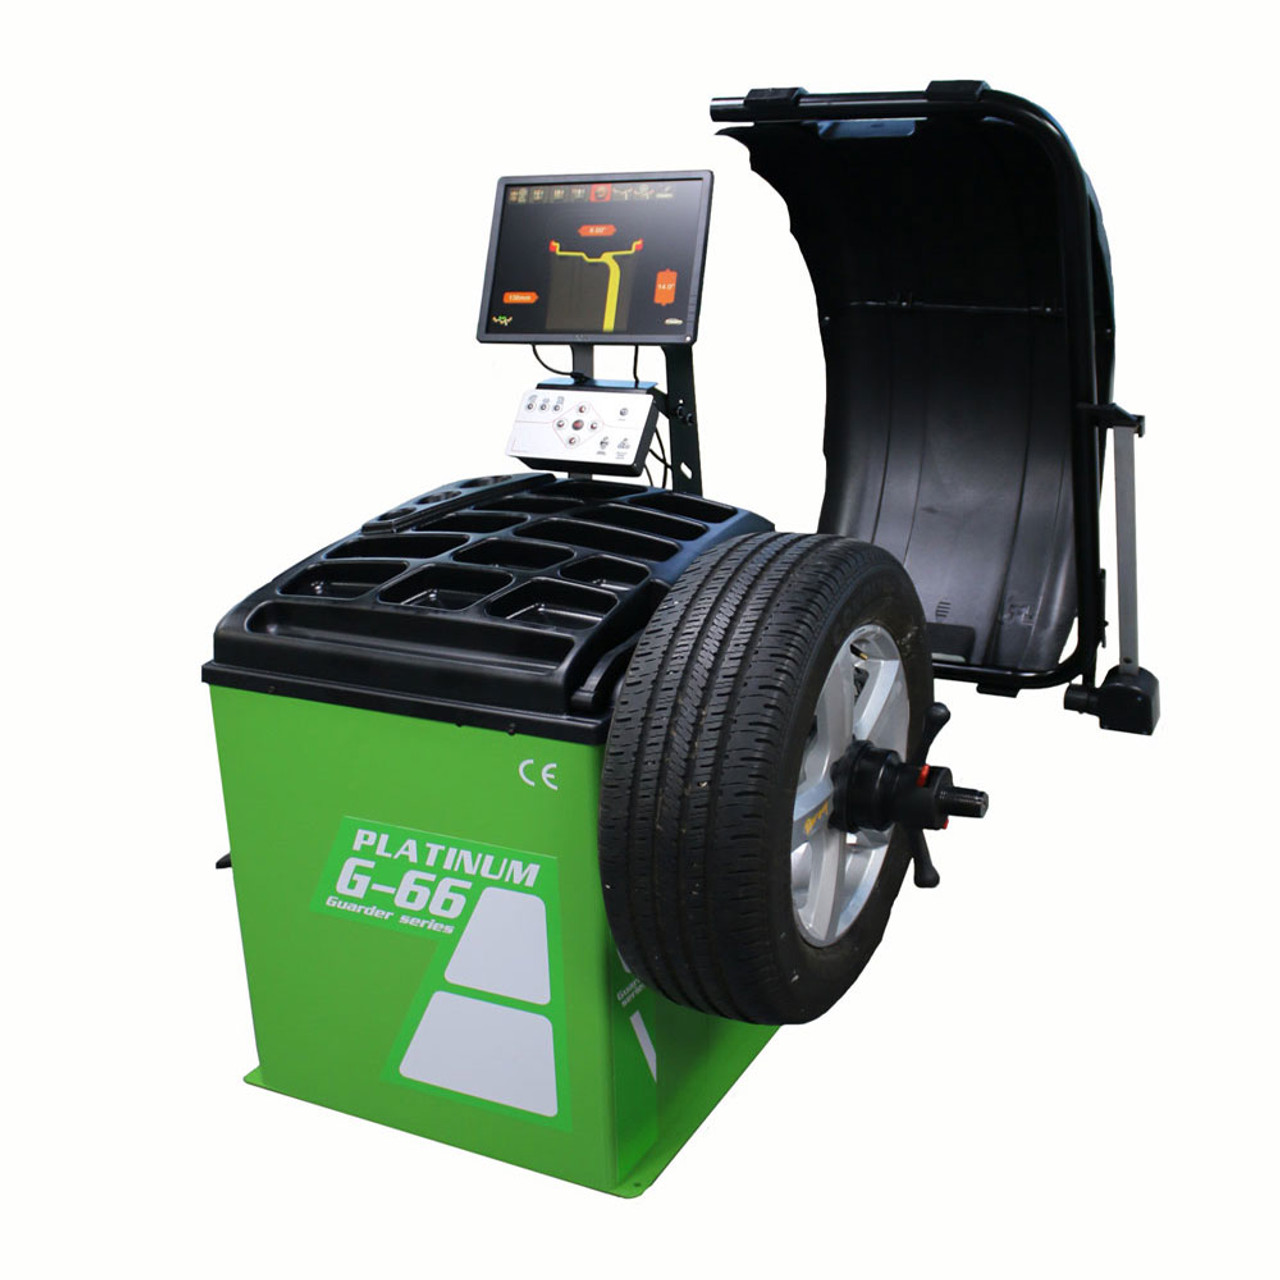 G-66 Guarder Series Fully-Automatic Wheel Balancer